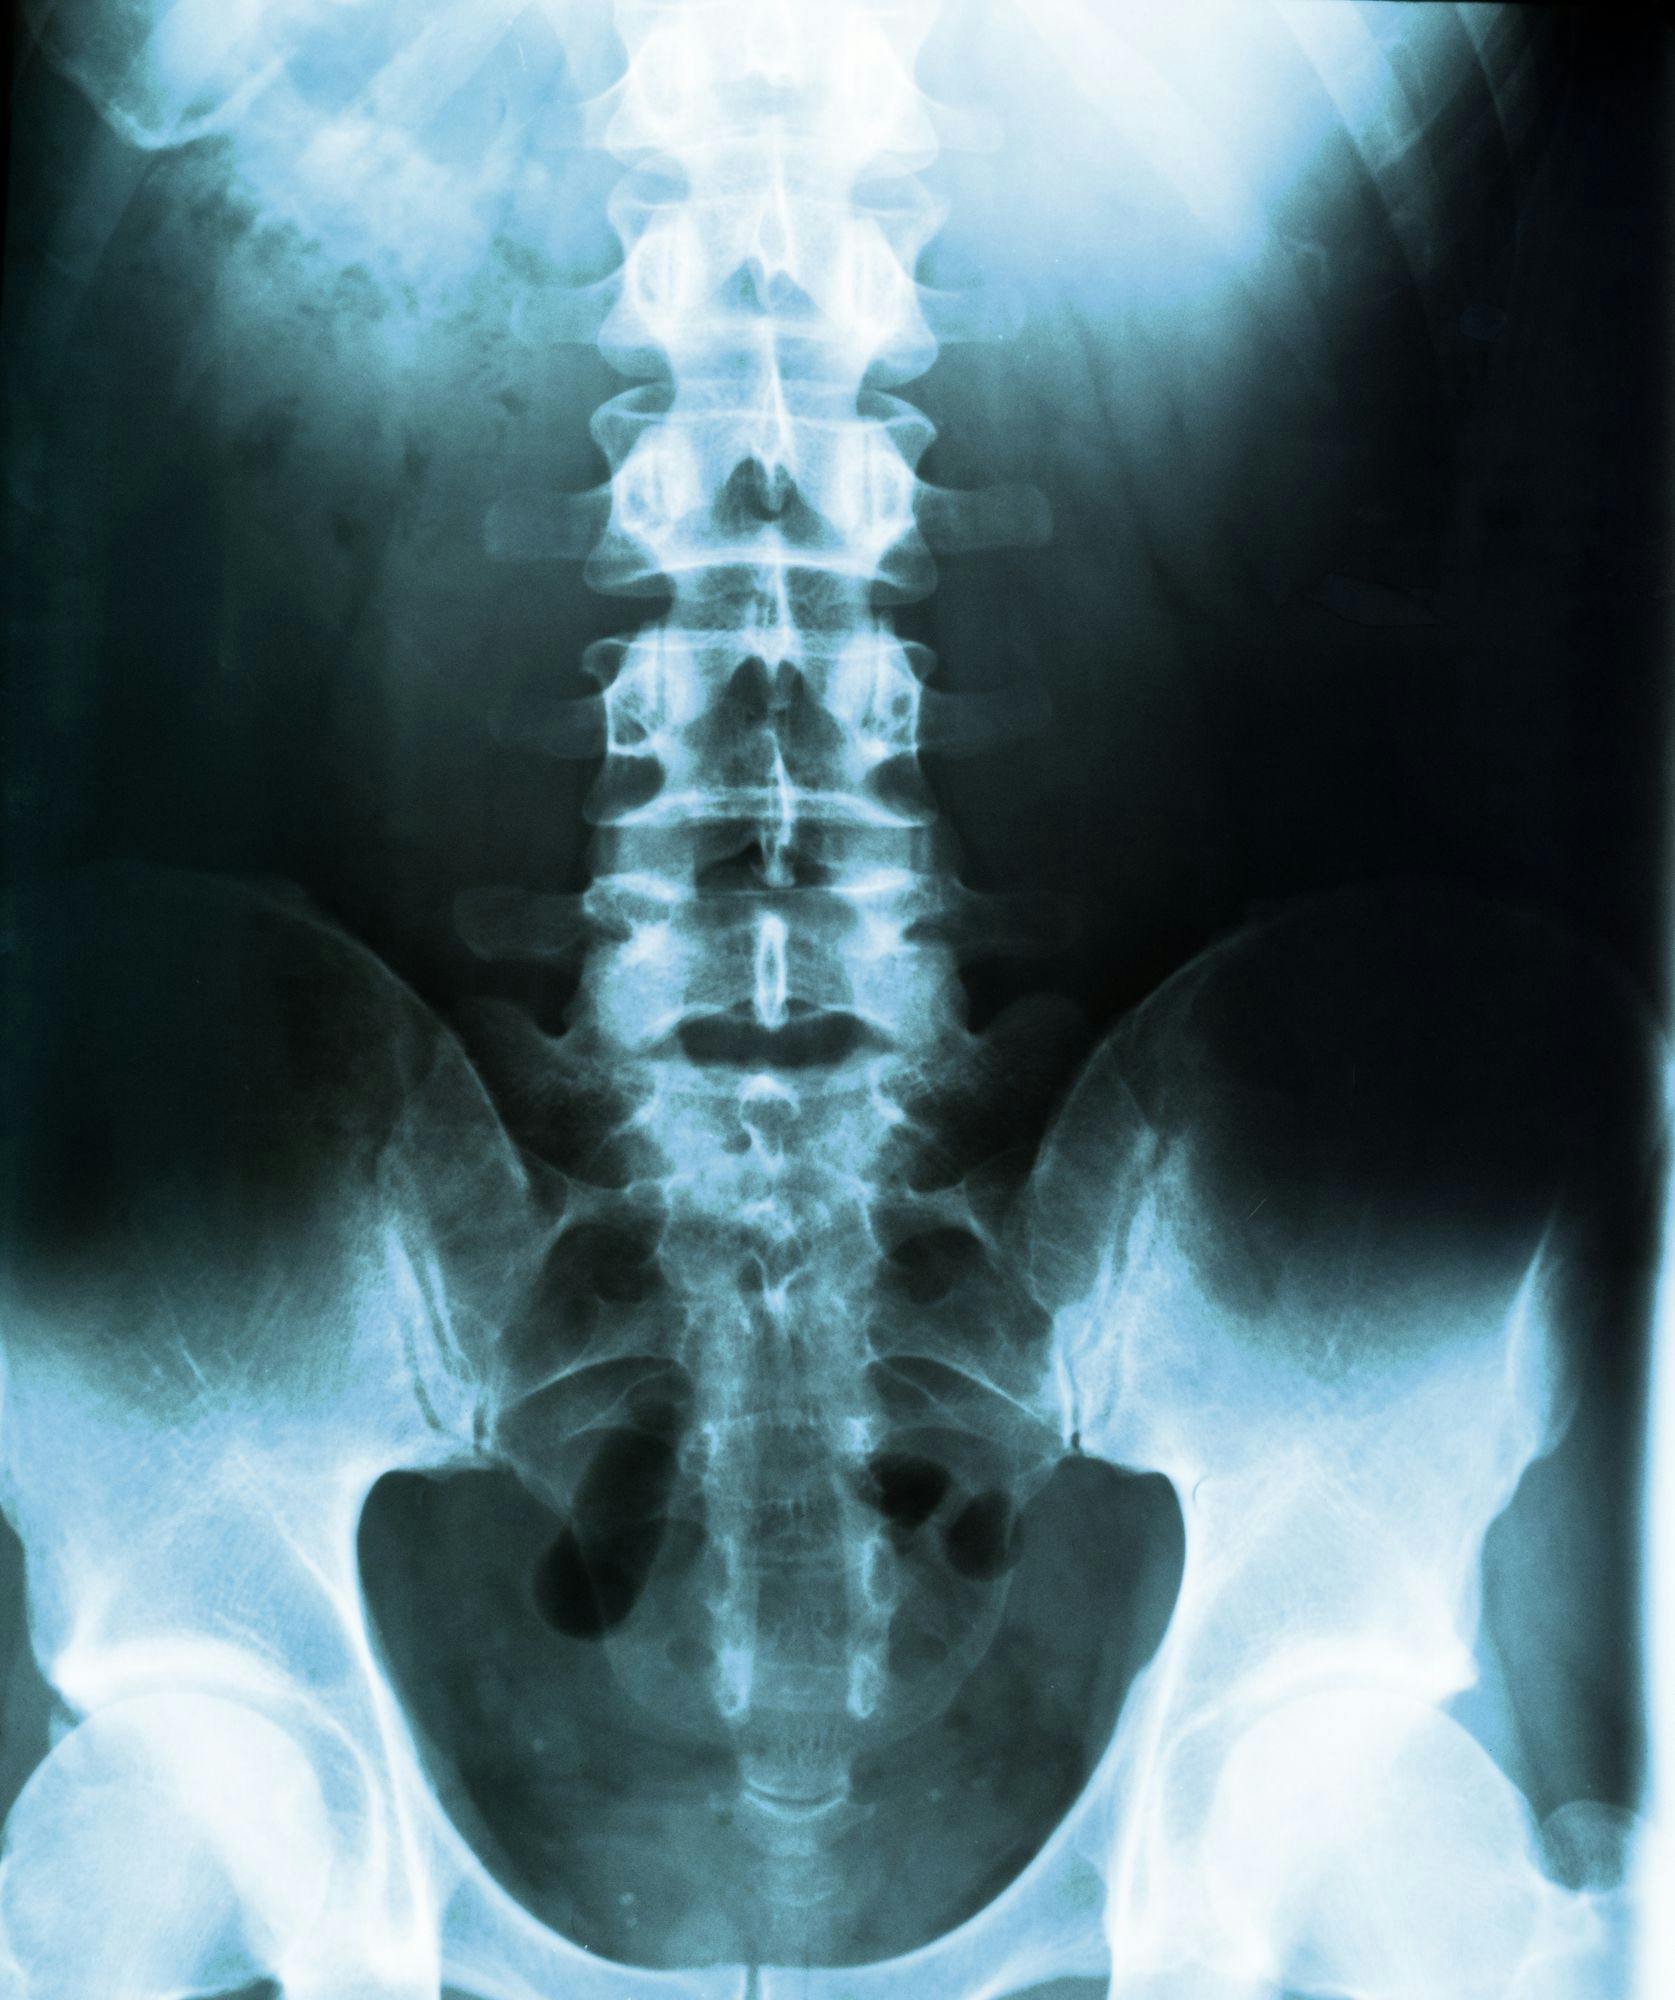 Image of a spine x-ray